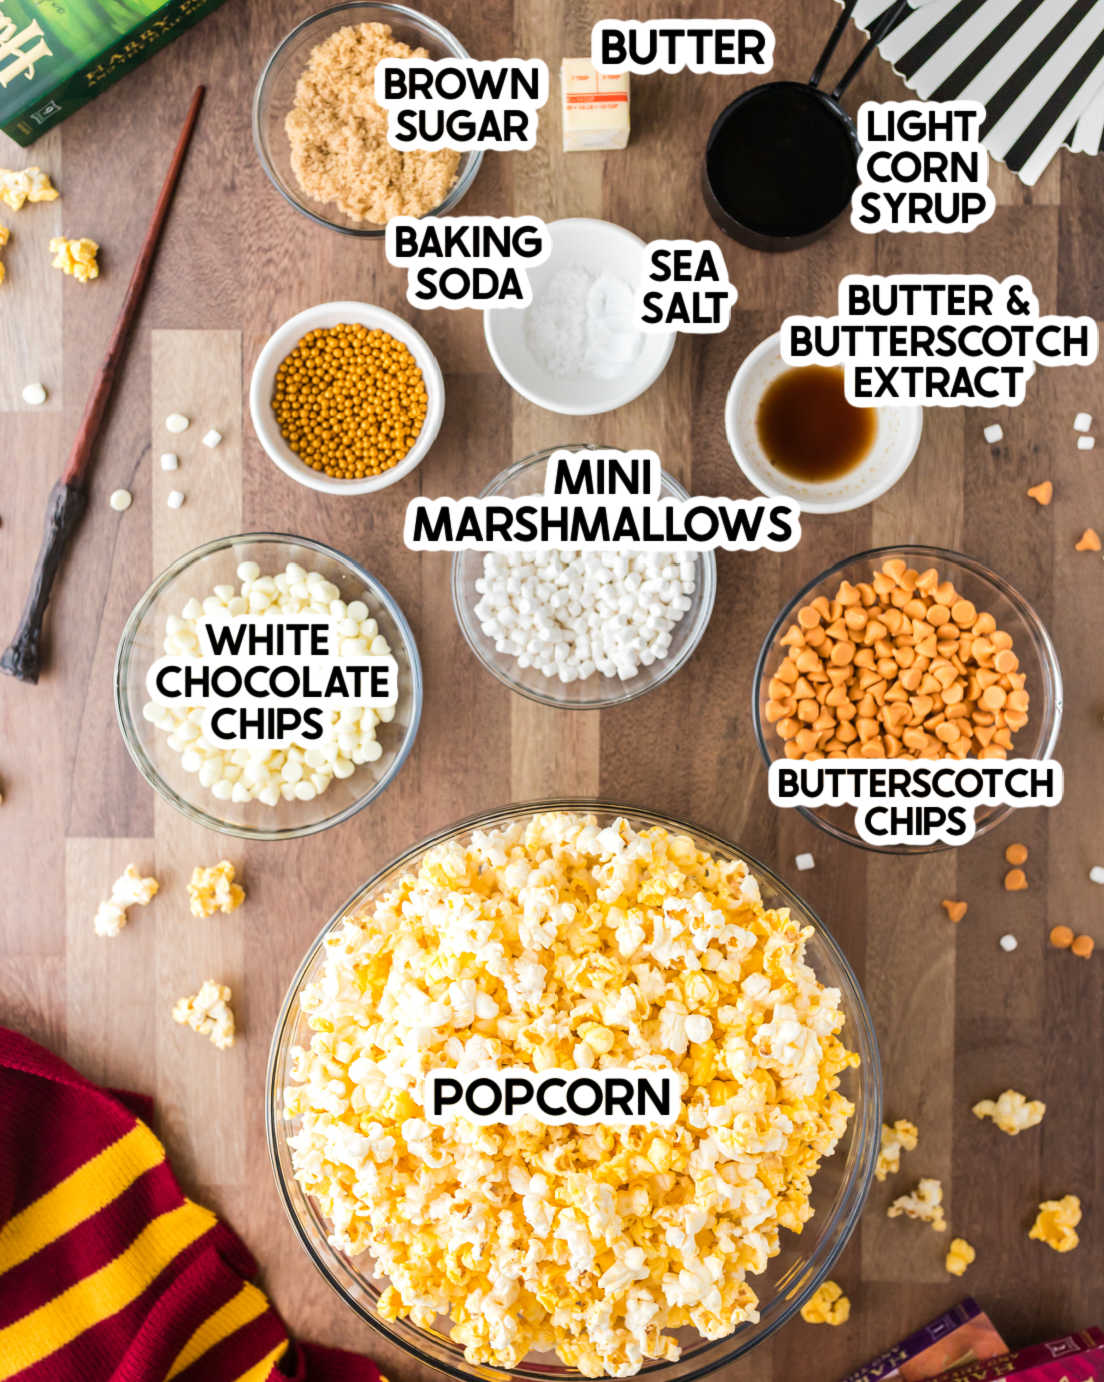 ingredients in butterbeer popcorn with labels